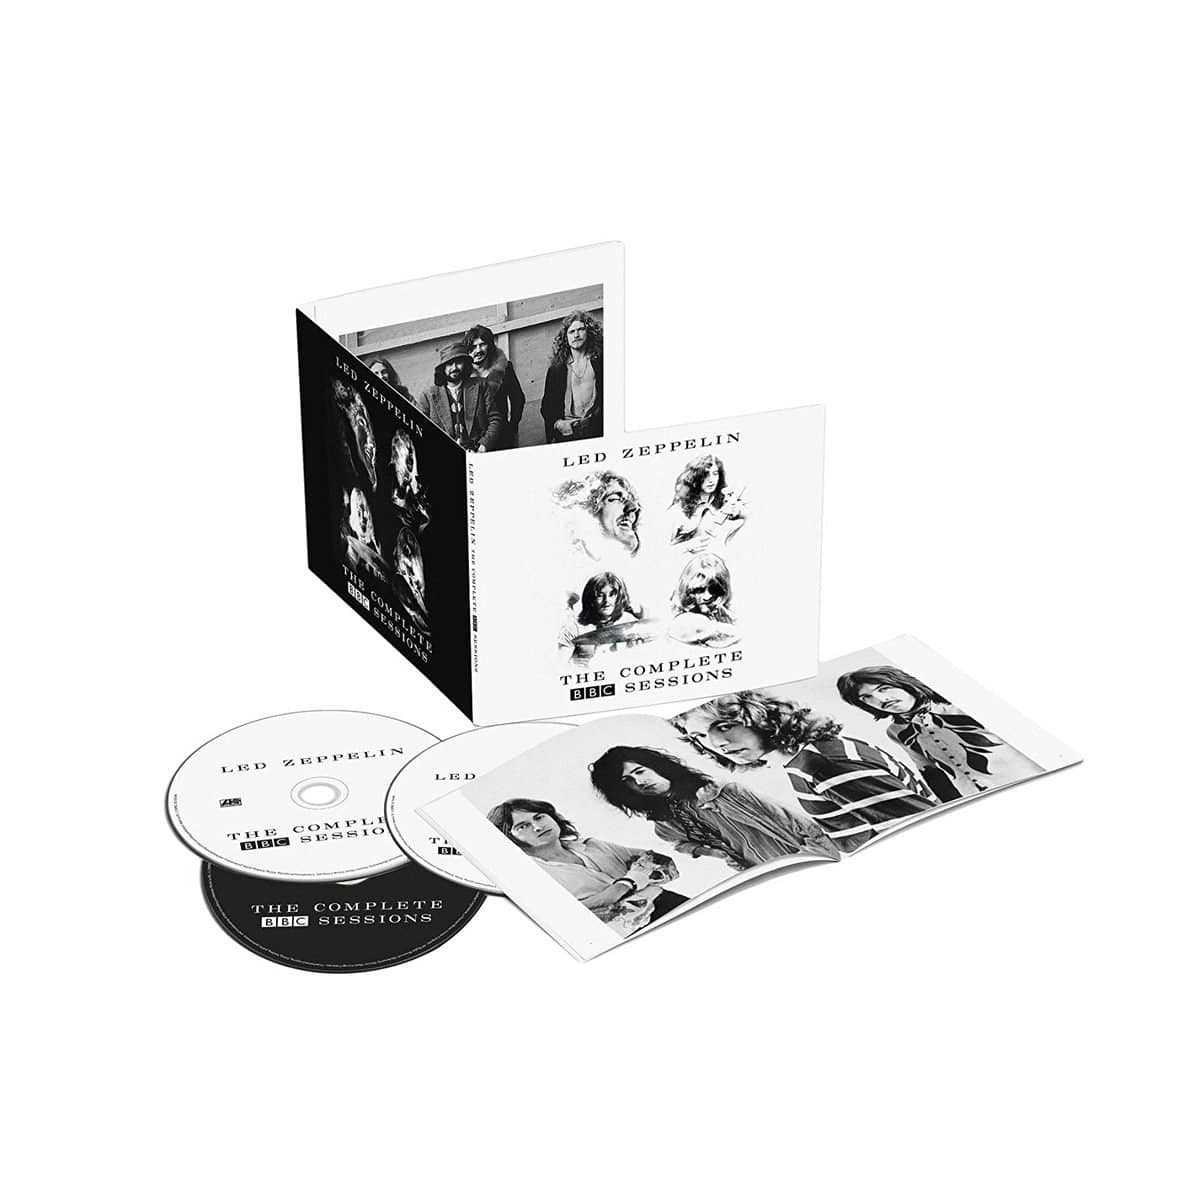 Led Zeppelin: The Complete BBC Sessions